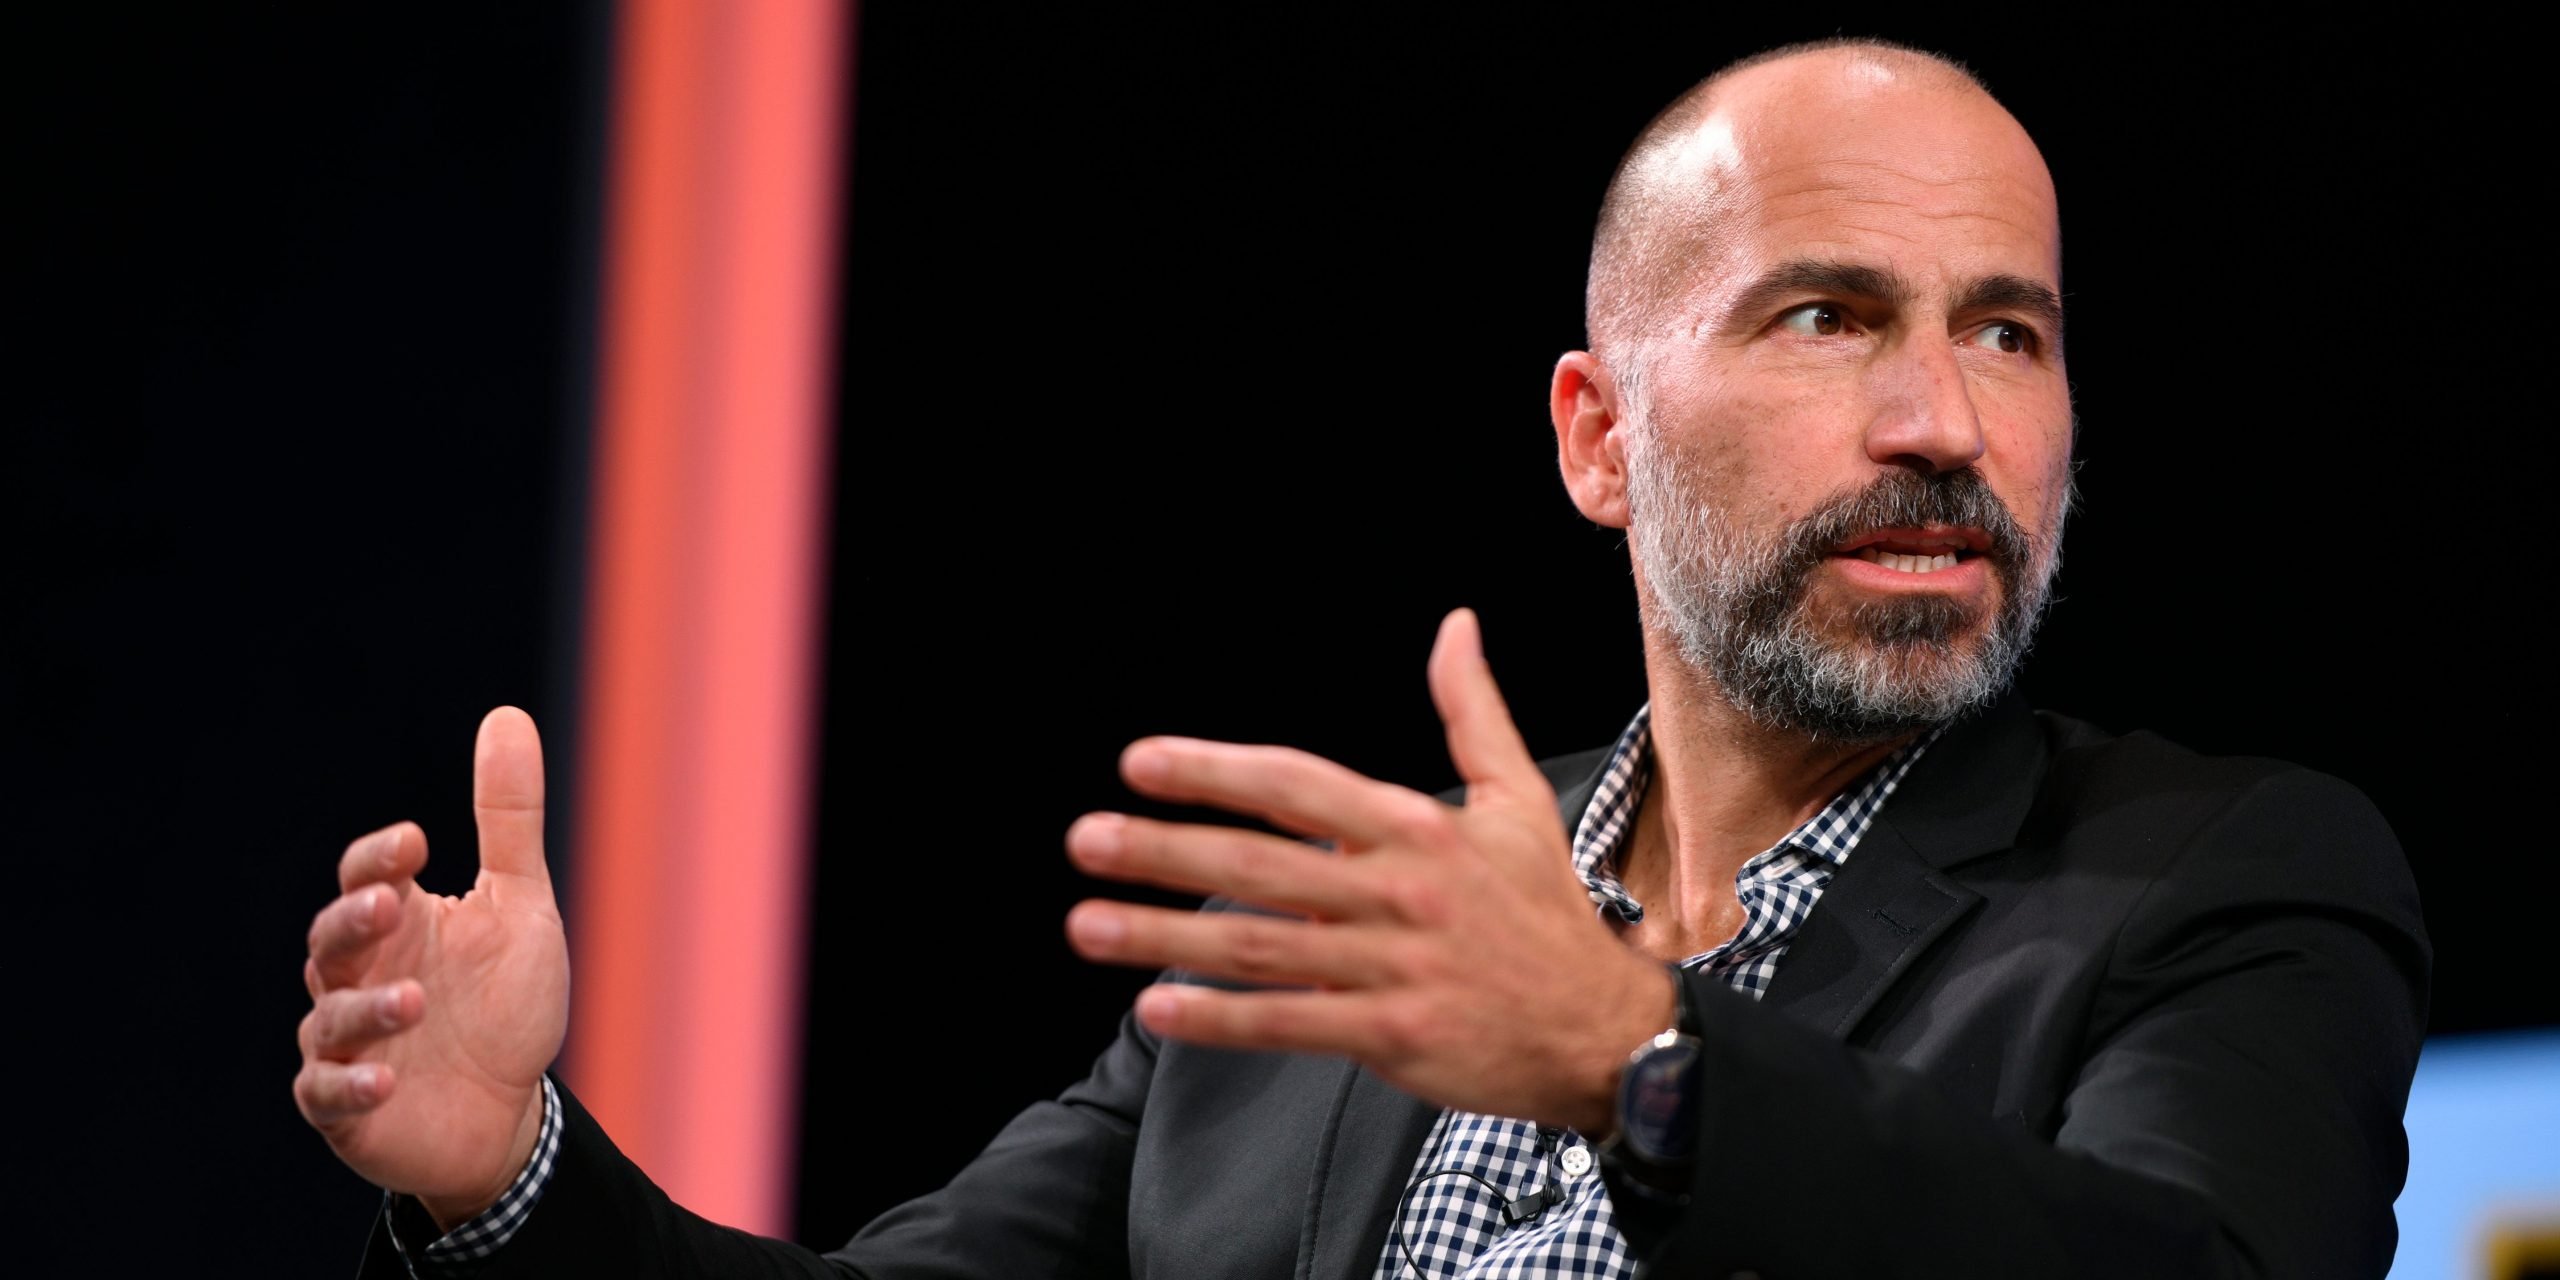 Dara Khosrowshahi, Chief Executive Officer, Uber, speaks onstage during the 2021 Concordia Annual Summit - Day 3 at Sheraton New York on September 22, 2021 in New York City.